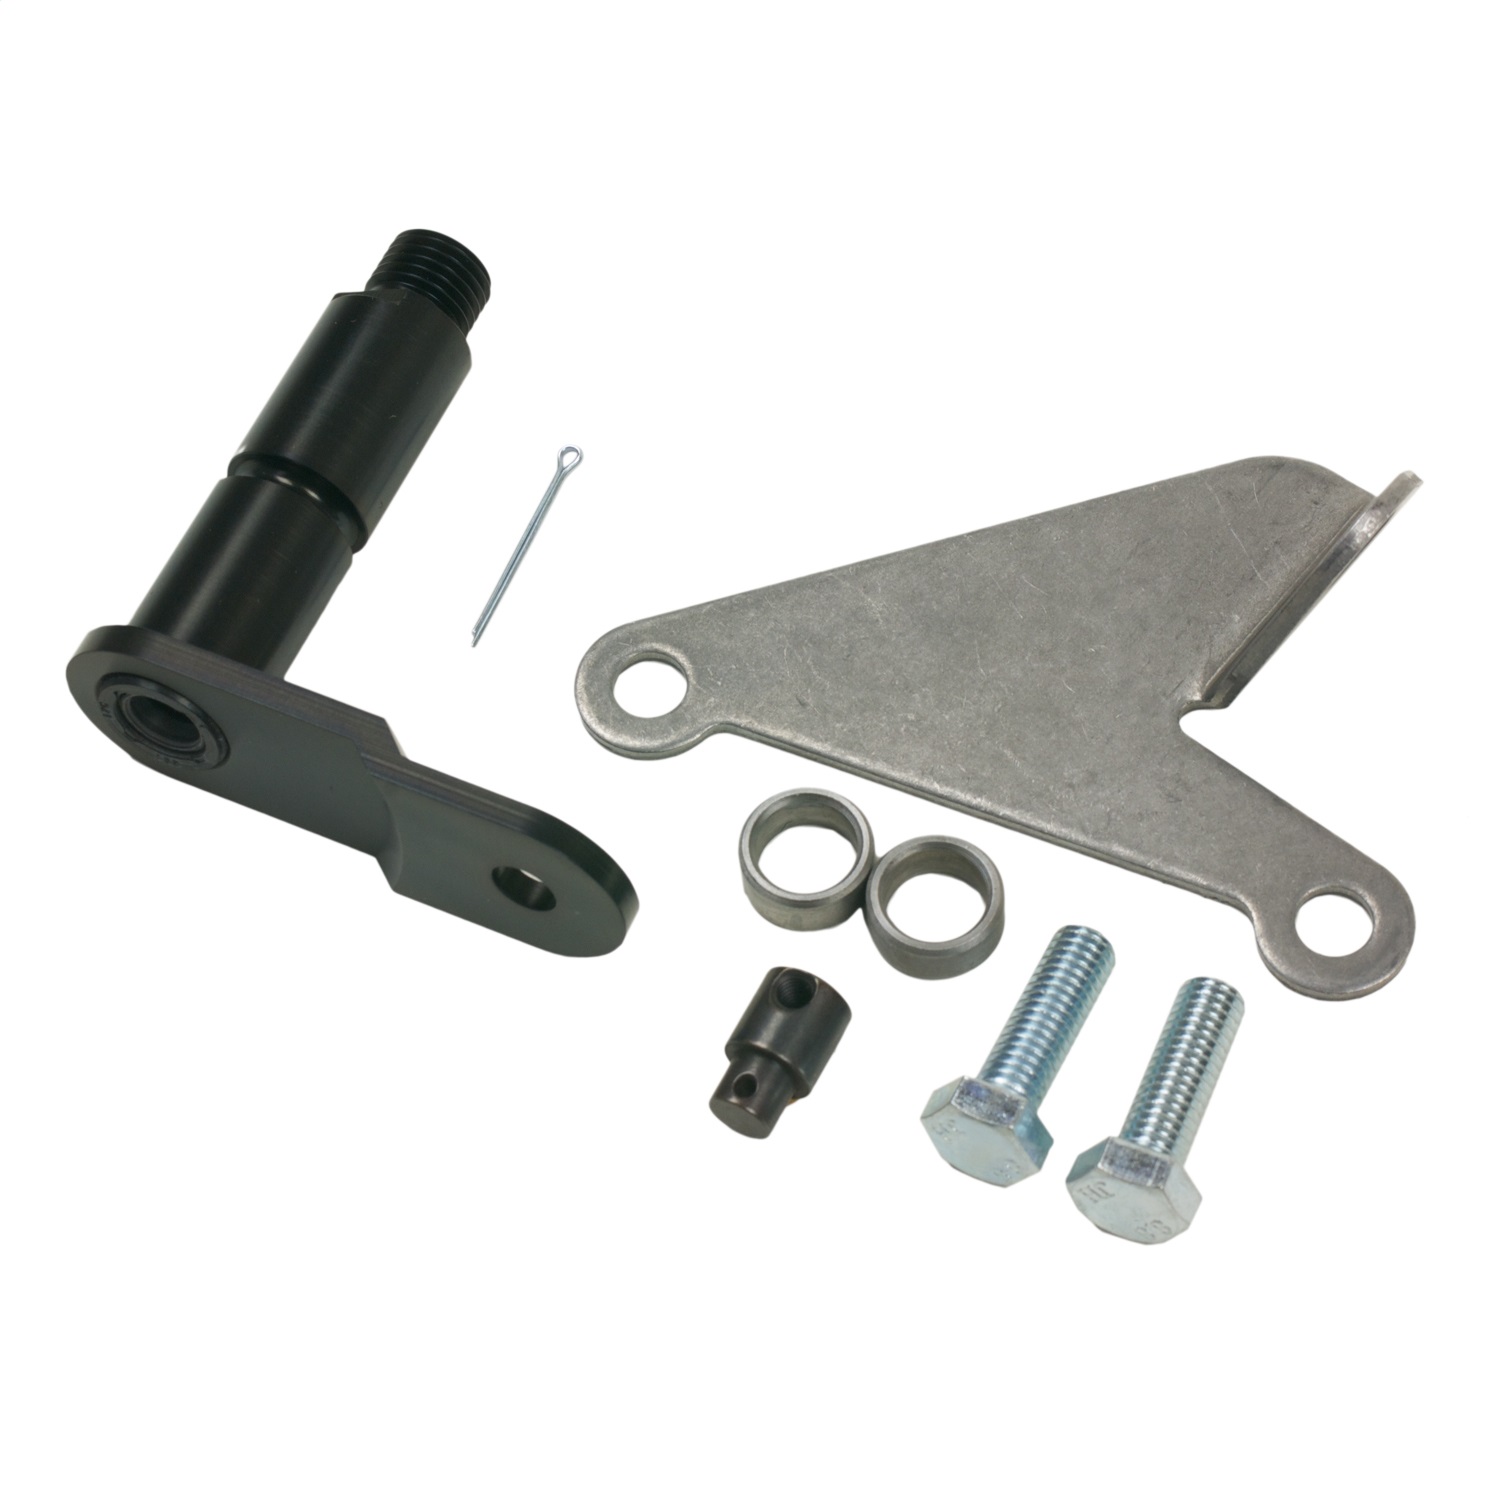 BRACKET AND LEVER KIT